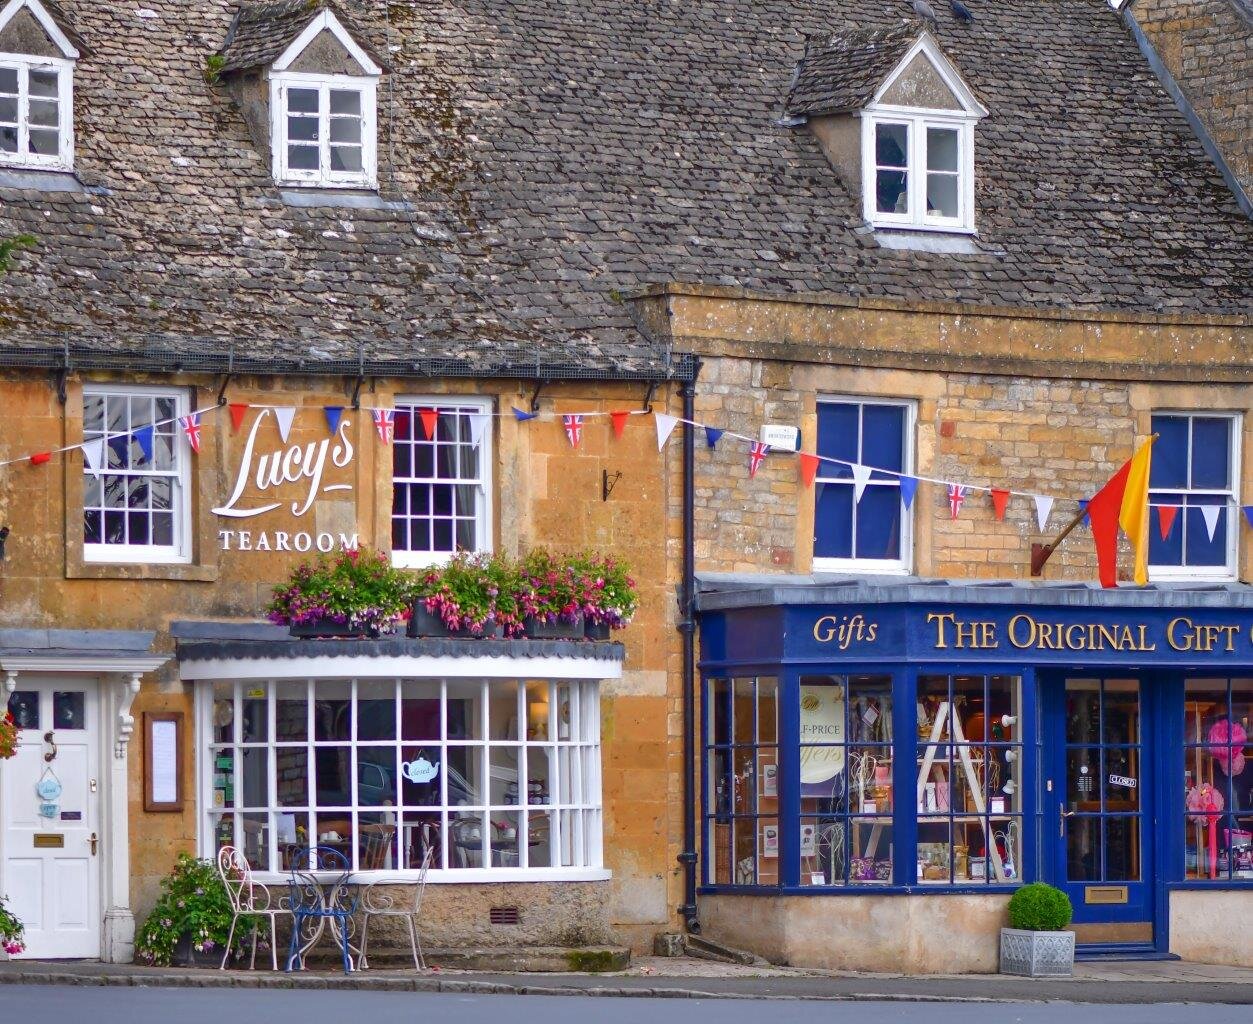 Stay at the Blue Boar hotel in Witney and explore Stow on the Wold and the Cotswolds.jpg